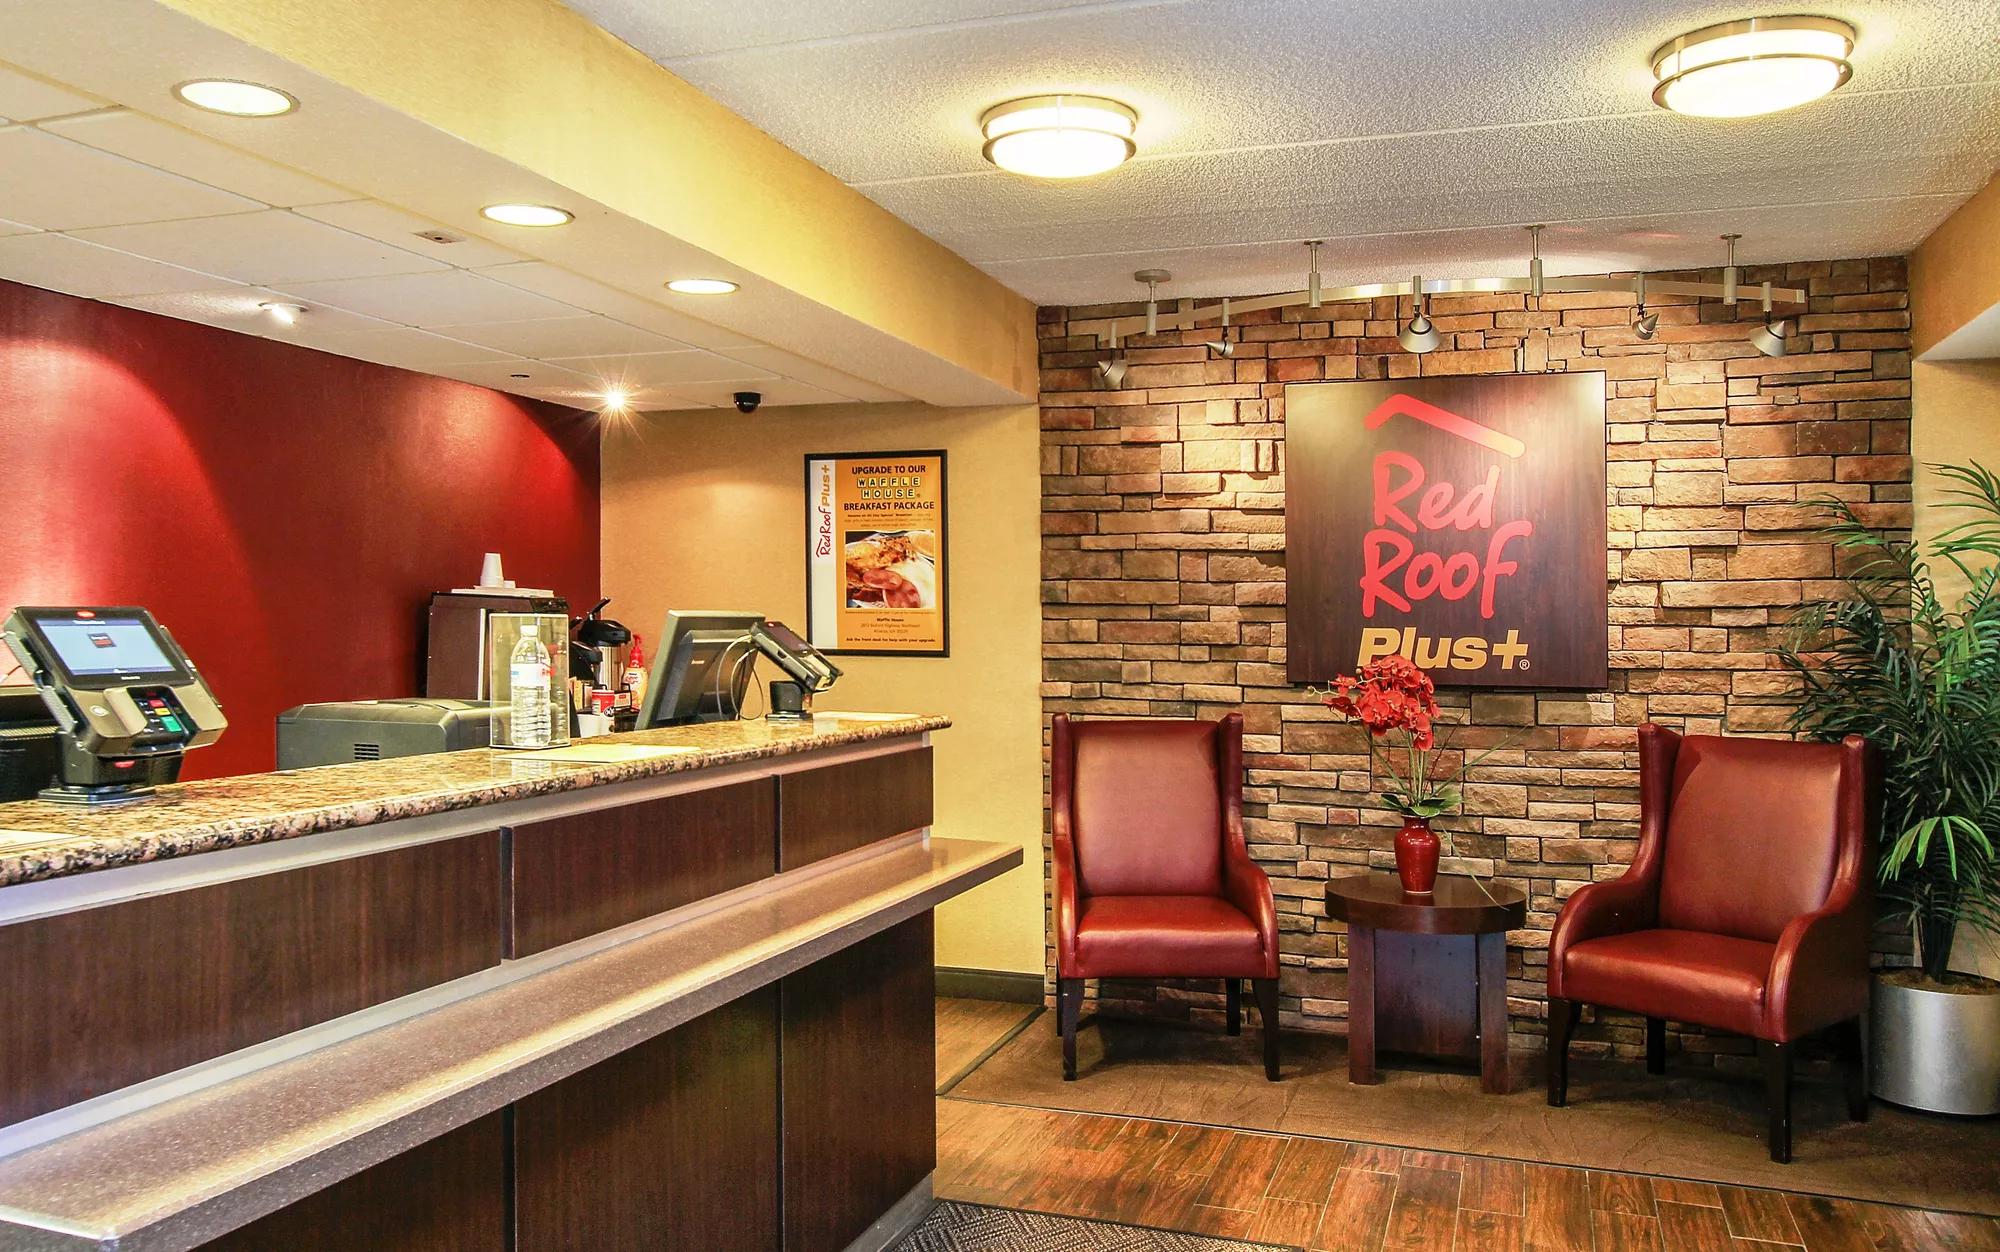 Red Roof PLUS+ Atlanta - Buckhead Front Desk and Lobby